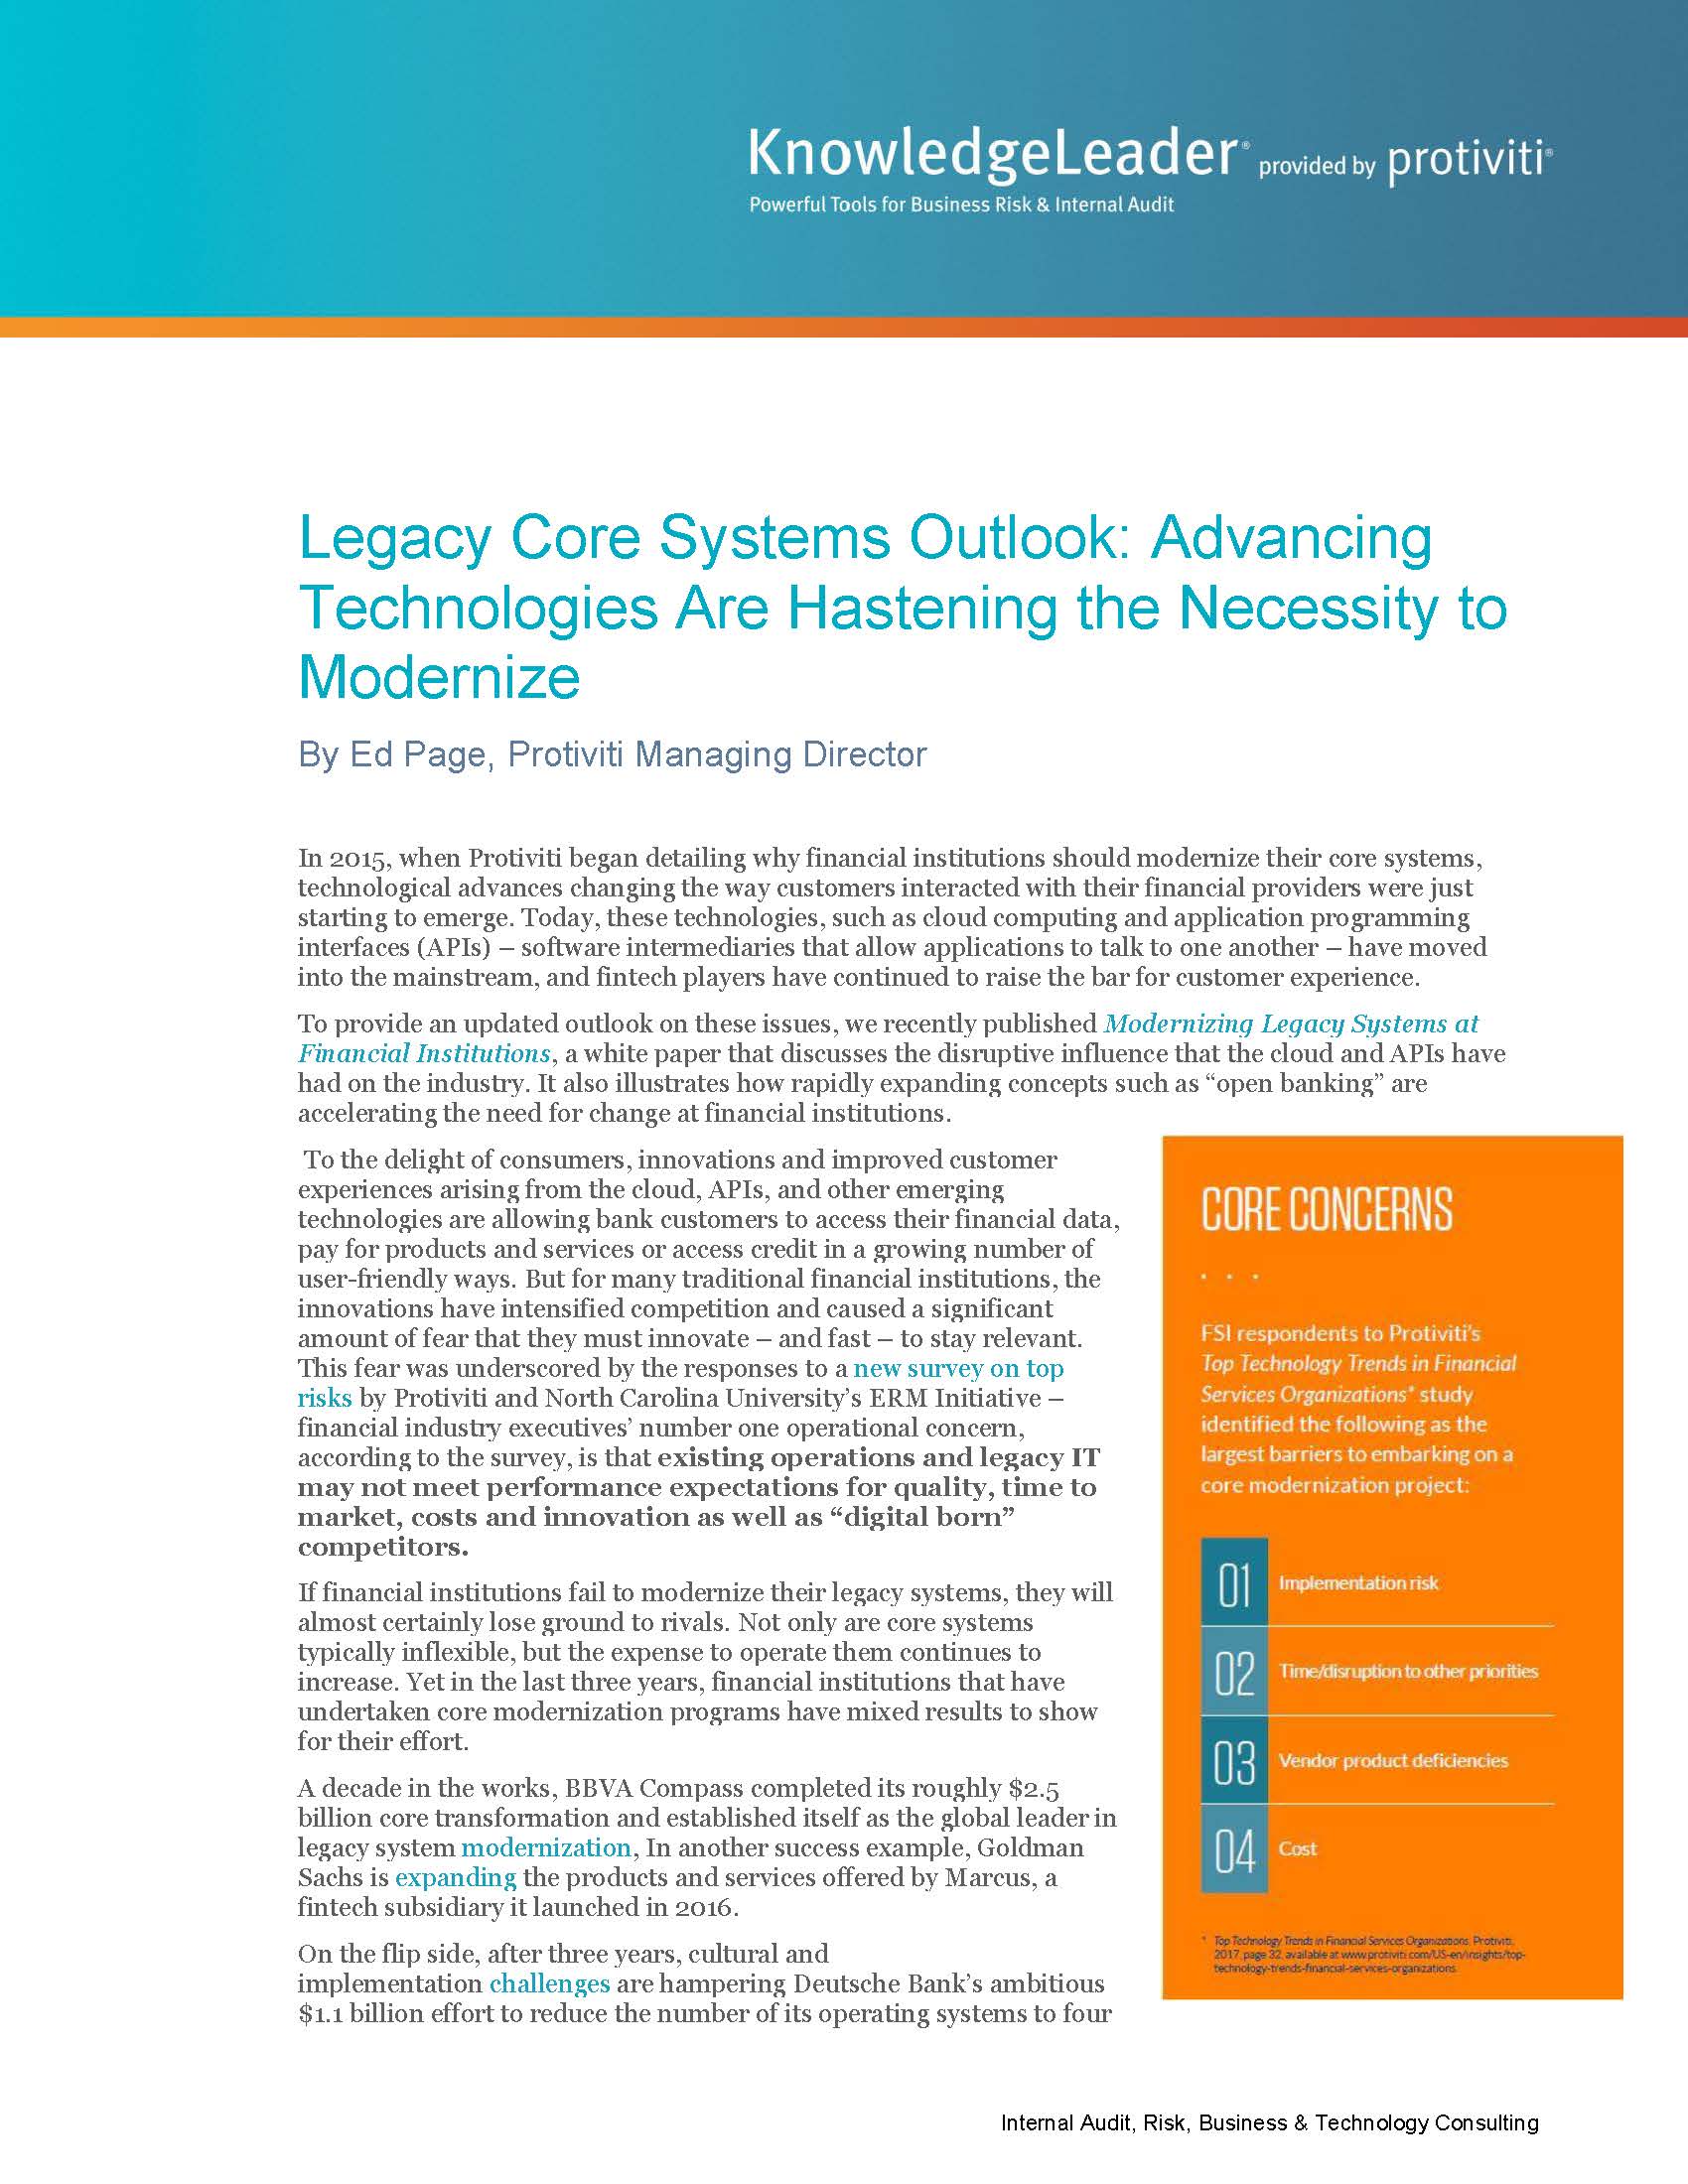 Screenshot of the first page of Legacy Core Systems Outlook Advancing Technologies Are Hastening the Necessity to Modernize